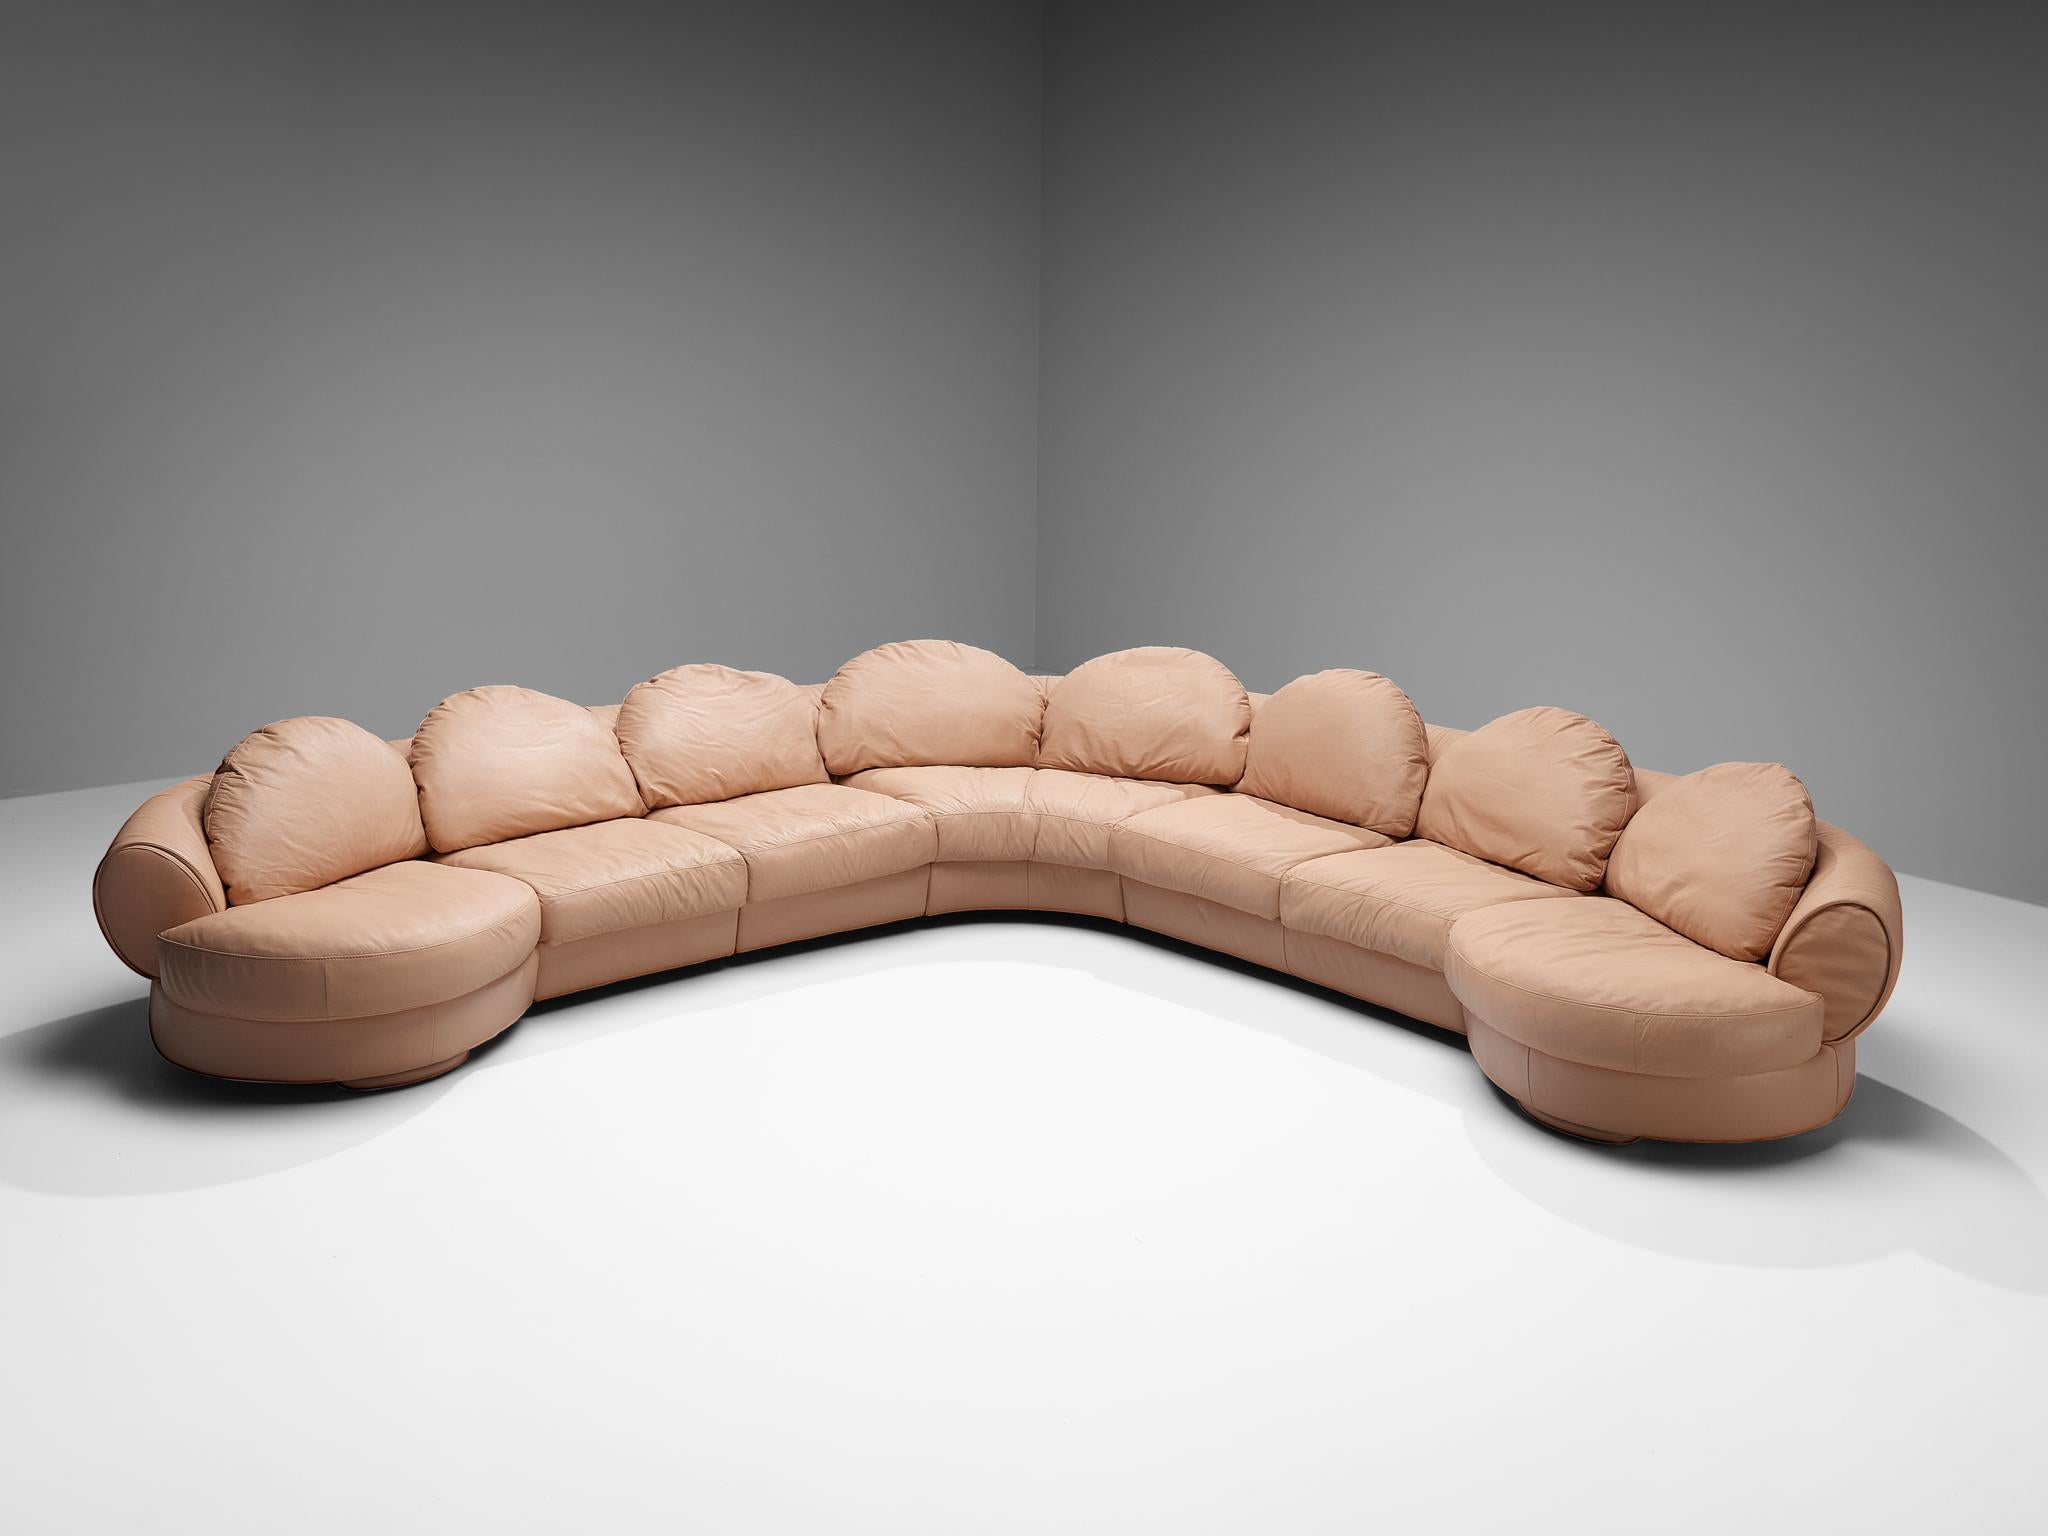 Wiener Werkstätte 'Attributed' Sectional Sofa in Pink Orange Leather  For Sale 3